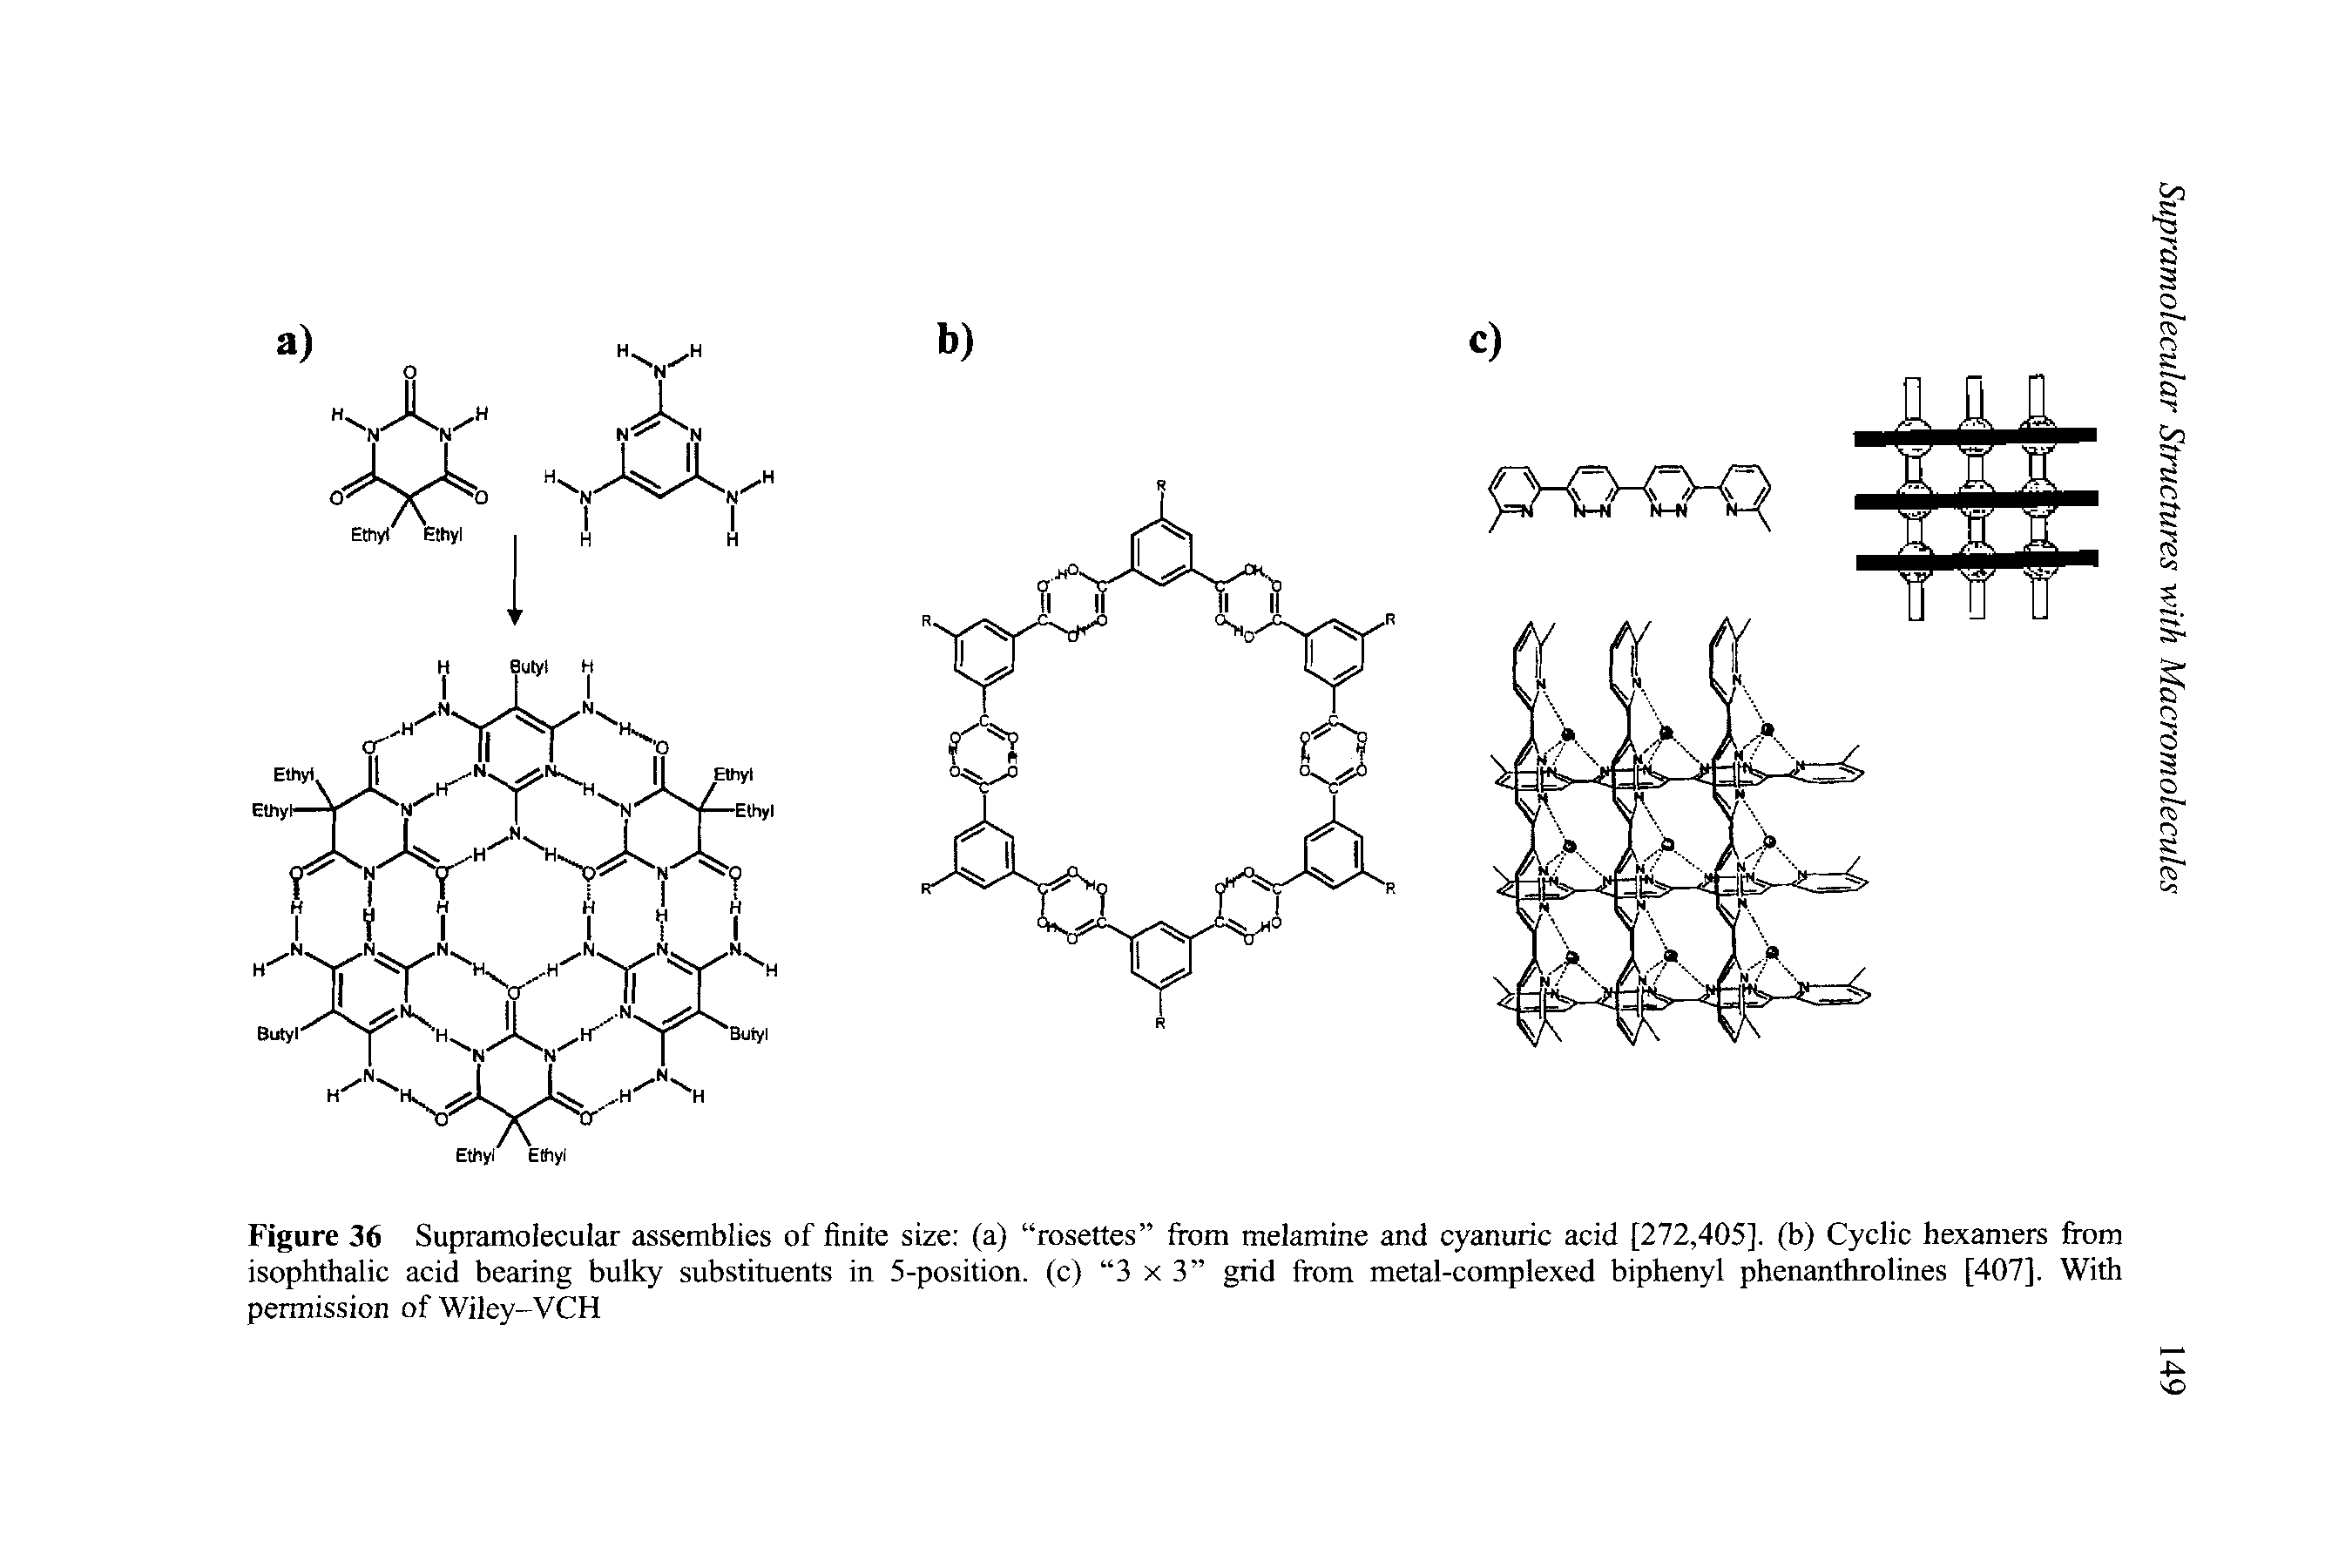 Figure 36 Supramolecular assemblies of finite size (a) rosettes from melamine and cyanuric acid [272,405]. (b) Cyclic hexamers from isophthalic acid bearing bulky substituents in 5-position, (c) 3 x 3 grid from metal-complexed biphenyl phenanthrolines [407]. With permission of Wiley-VCH...